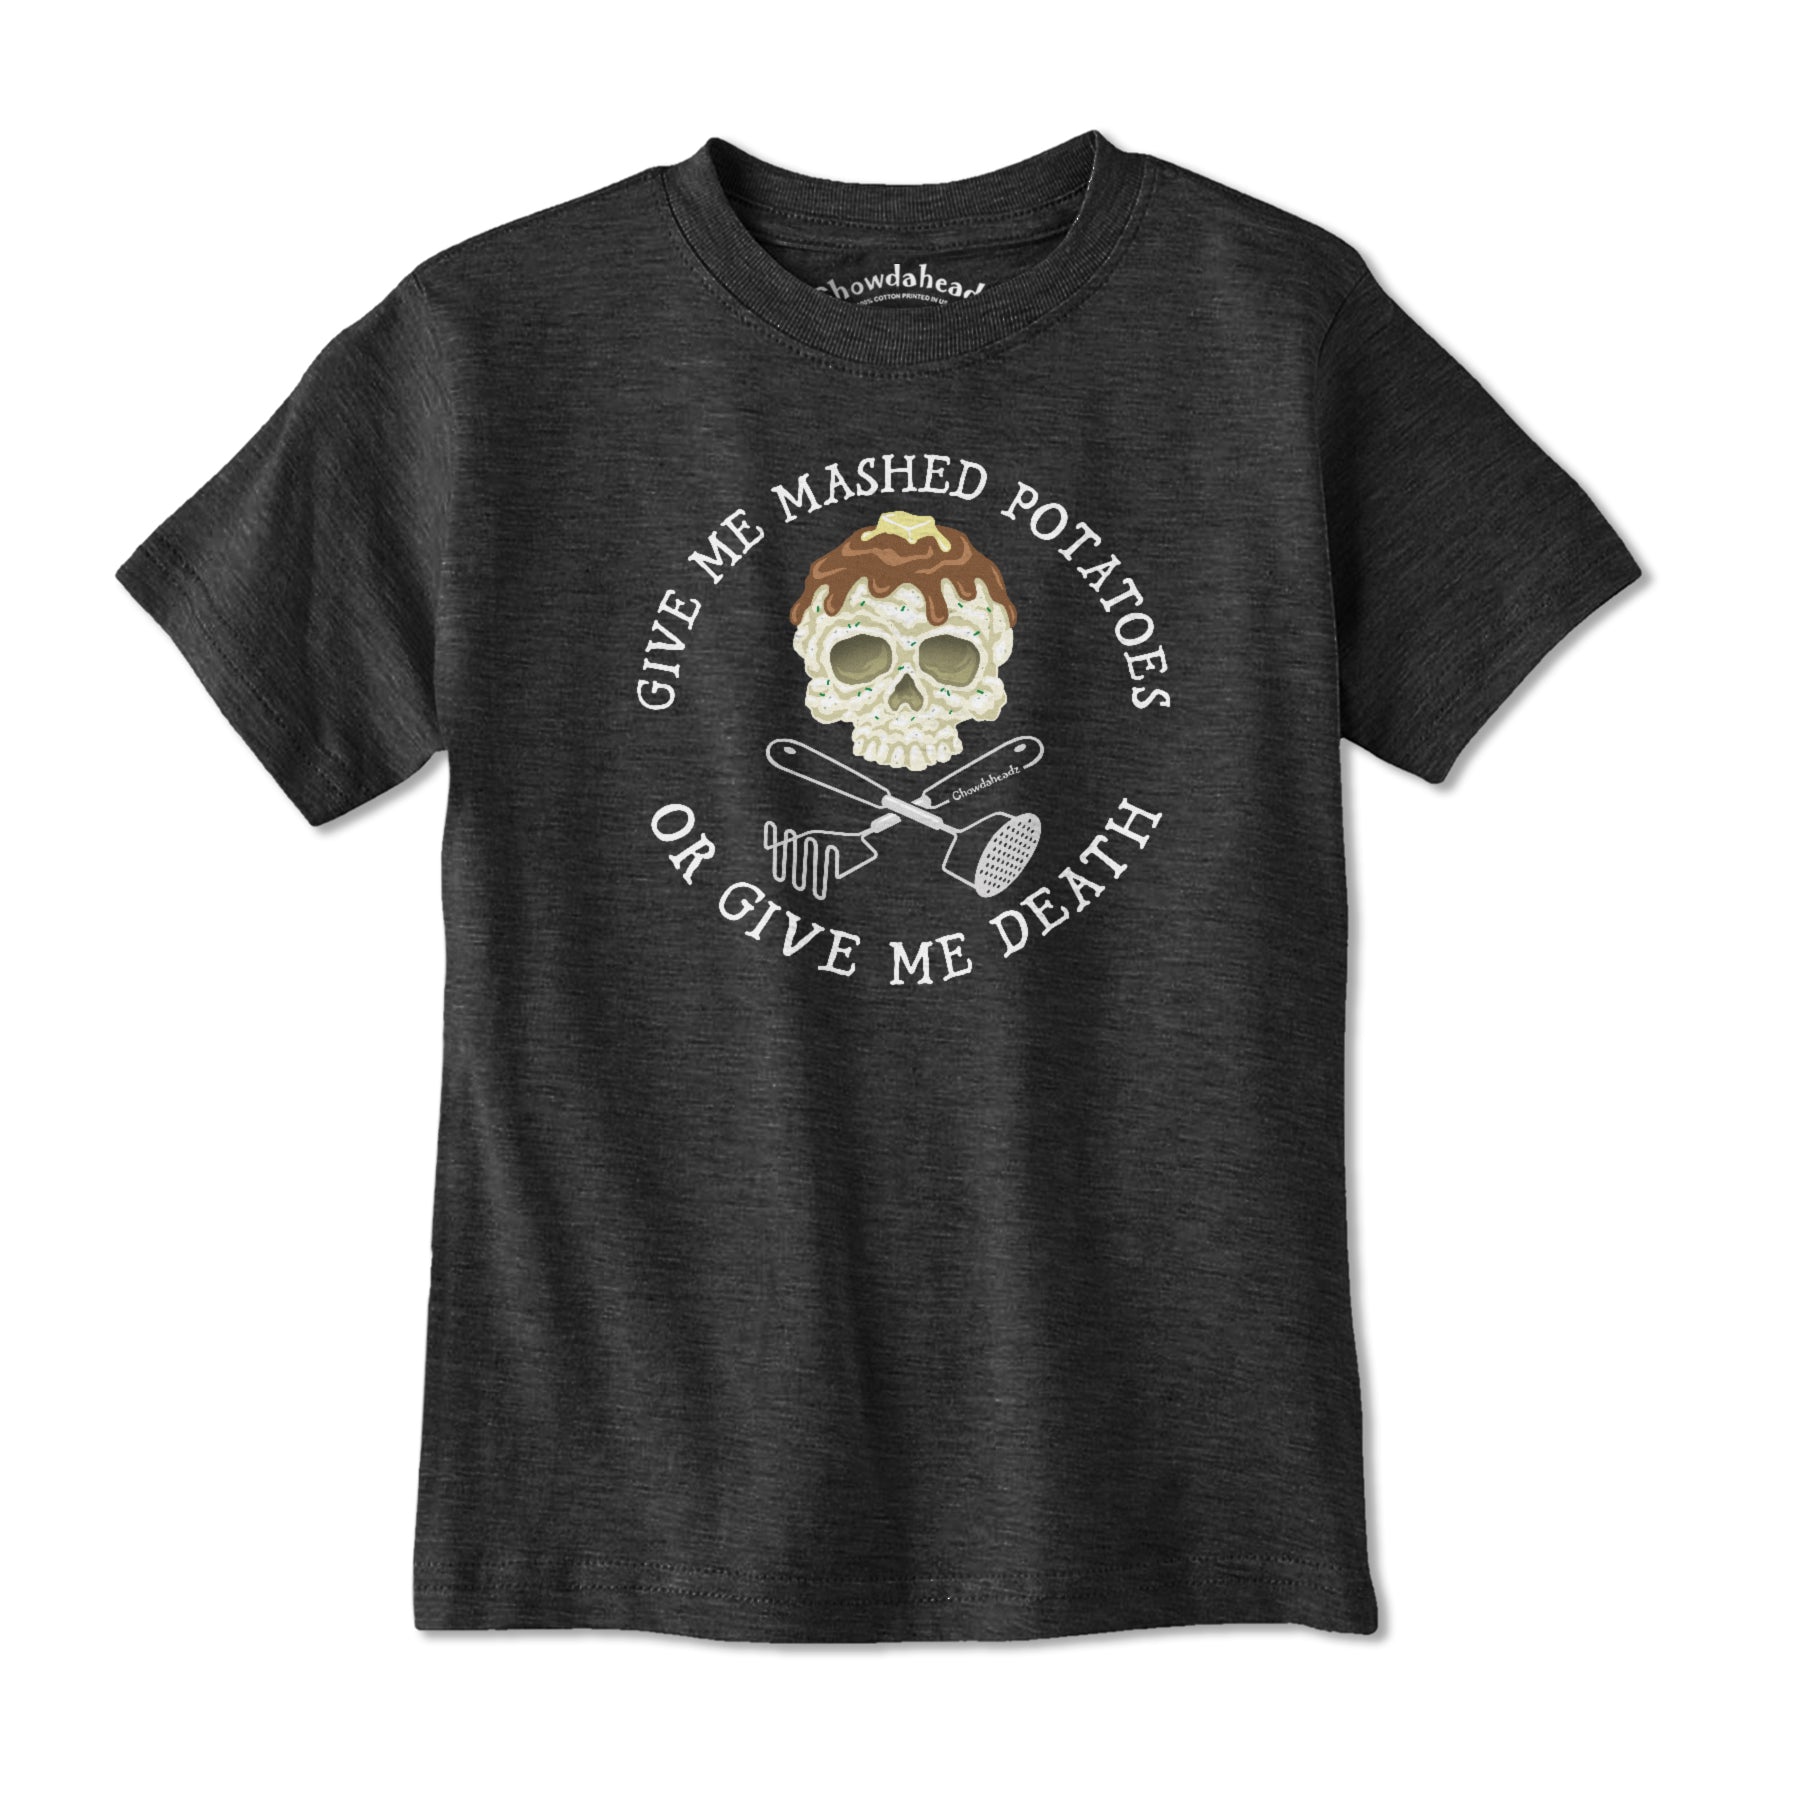 Mashed Potatoes or Death Youth T-Shirt - Chowdaheadz